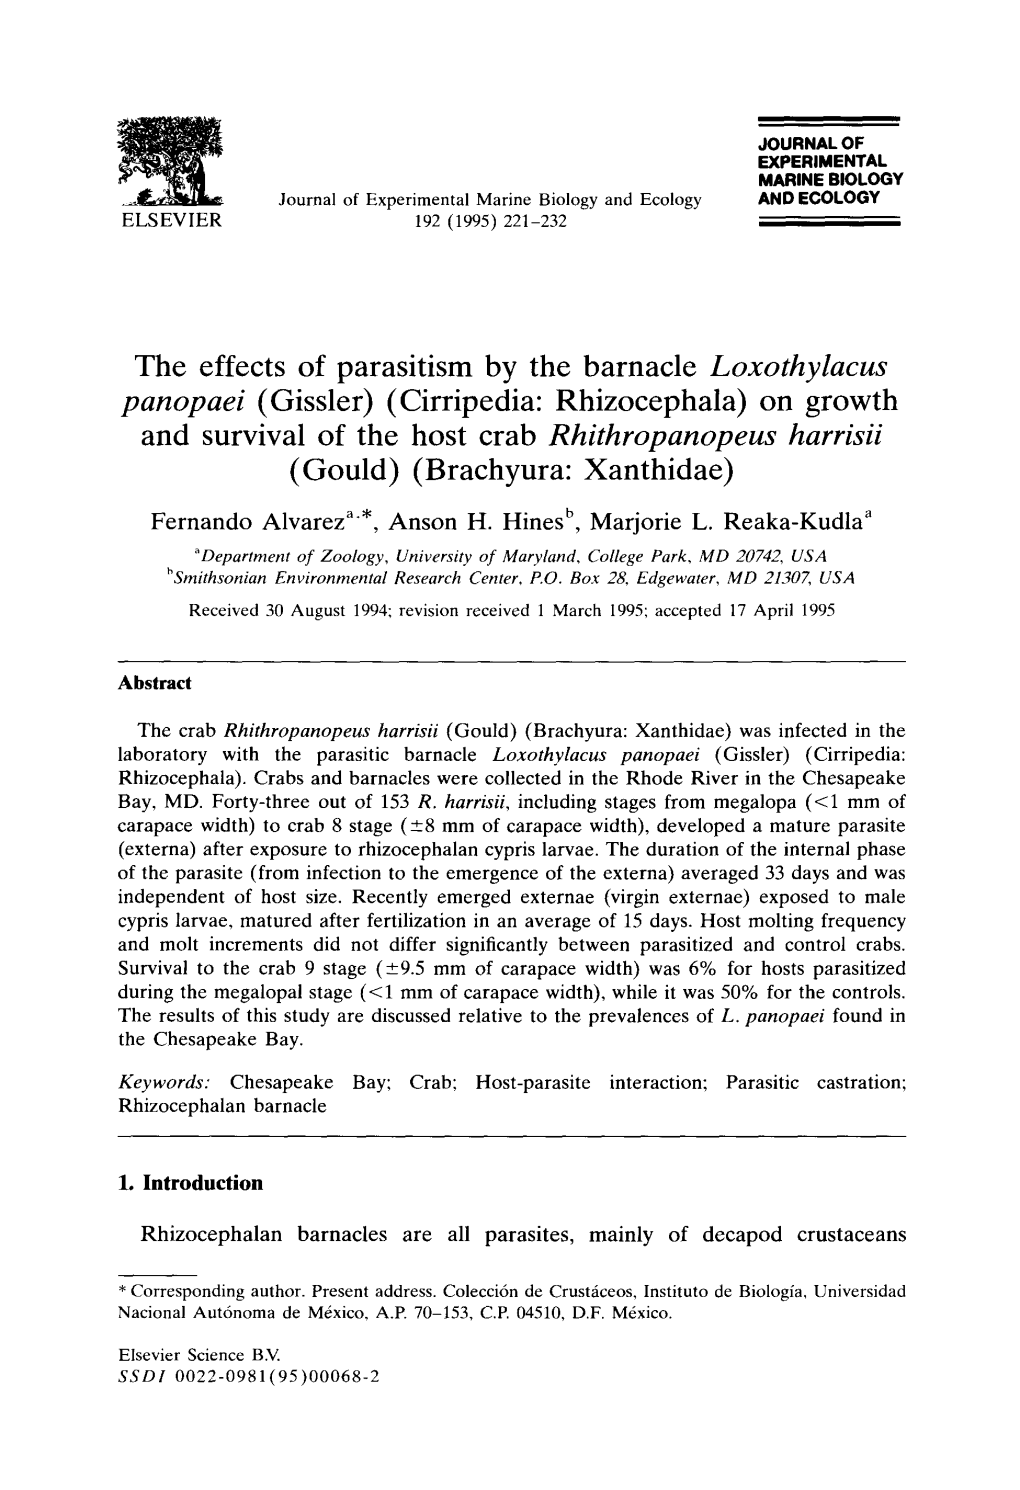 The Effects of Parasitism by the Barnacle Loxothylacus Panopaei (Gissler) (Cirripedia: Rhizocephala) on Growth and Survival of T